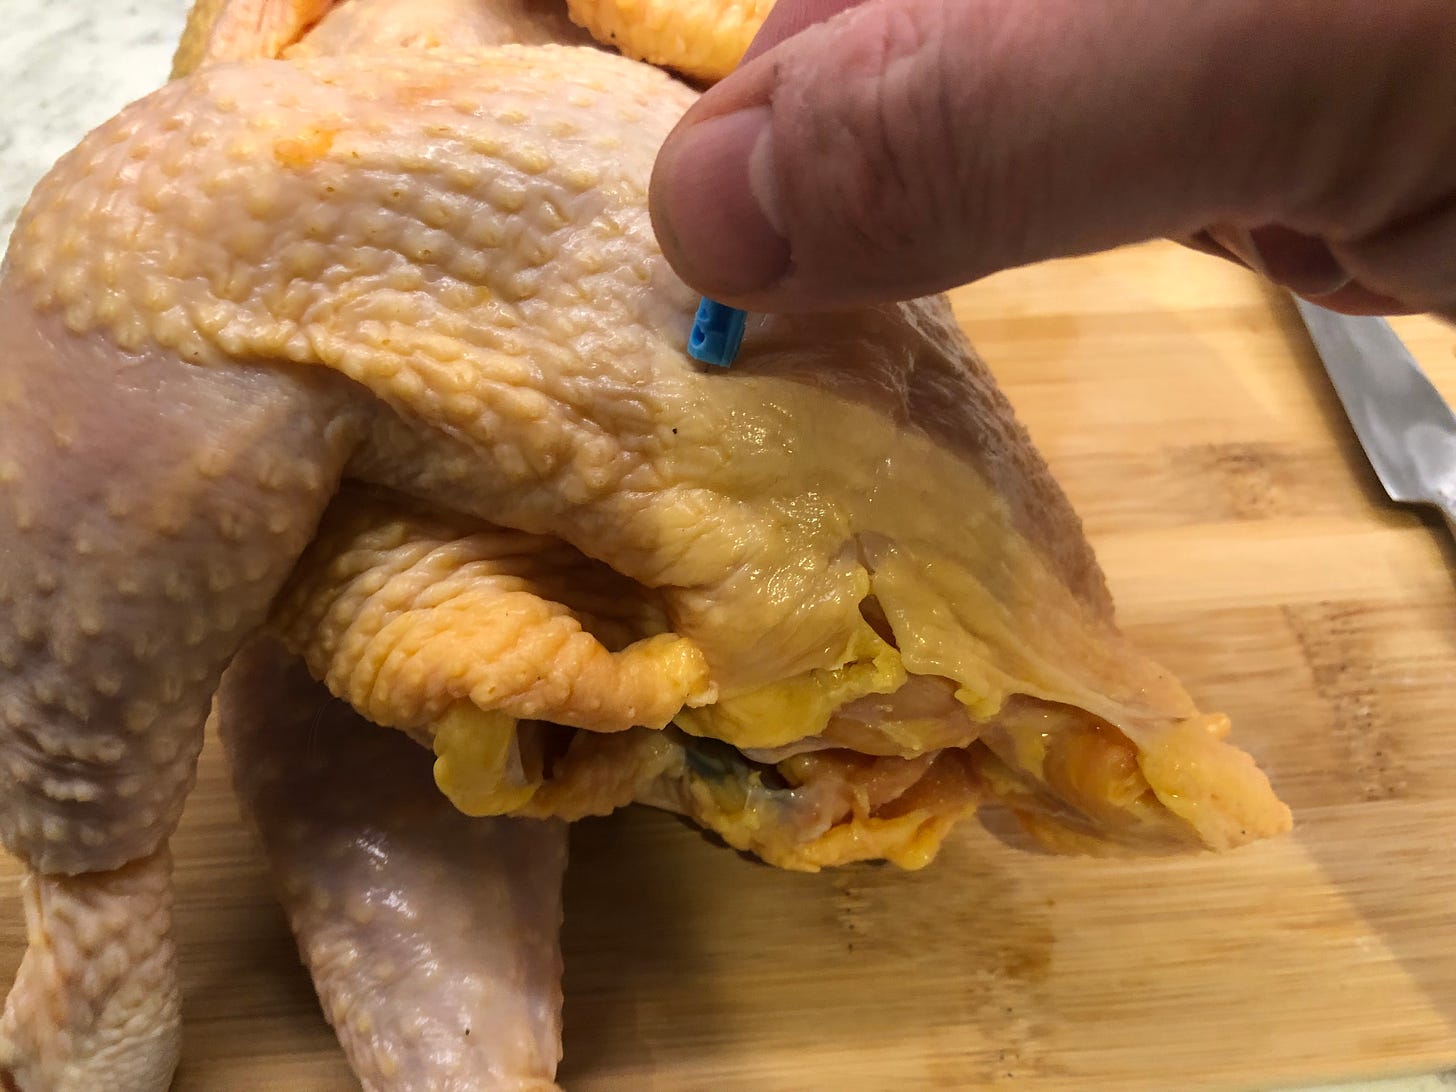 Piercing the fat on a chicken thigh with a blood testing lancet